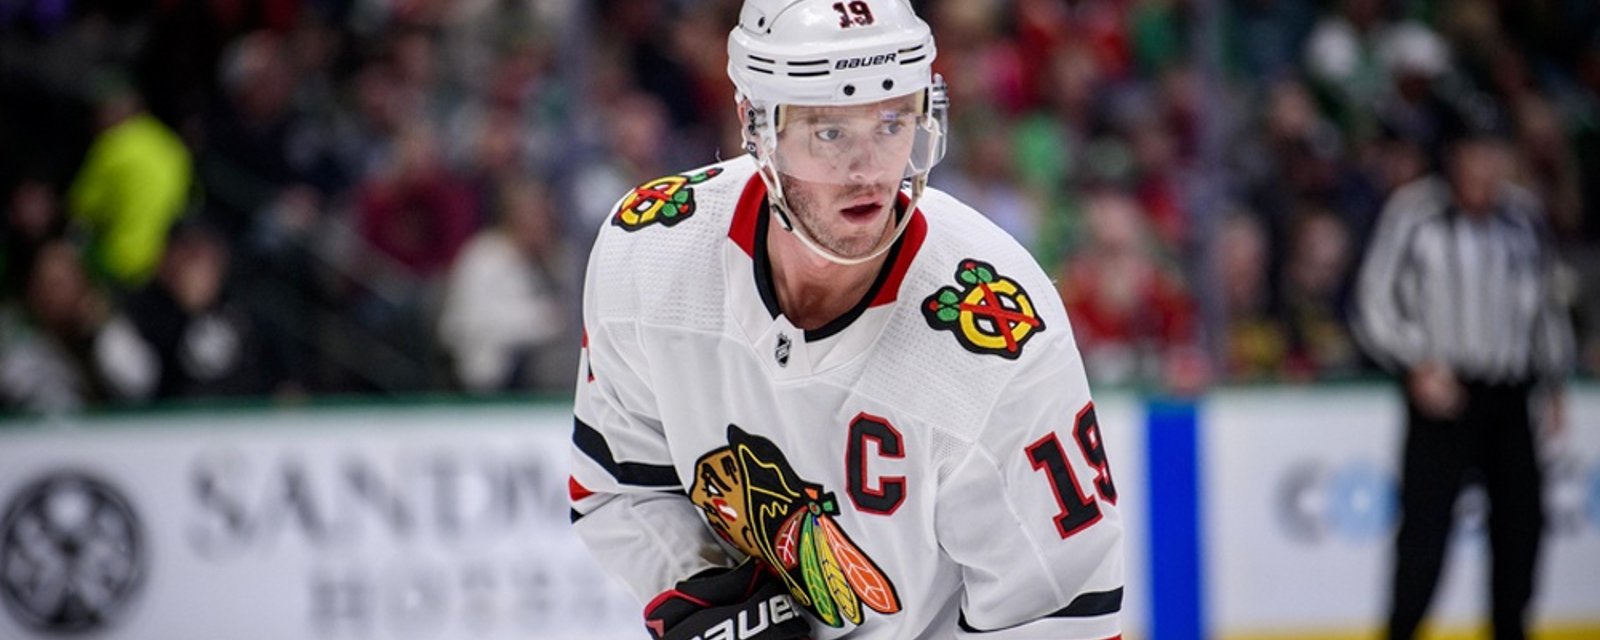 ICYMI: Toews shakes up the hockey world with a stunning call to arms